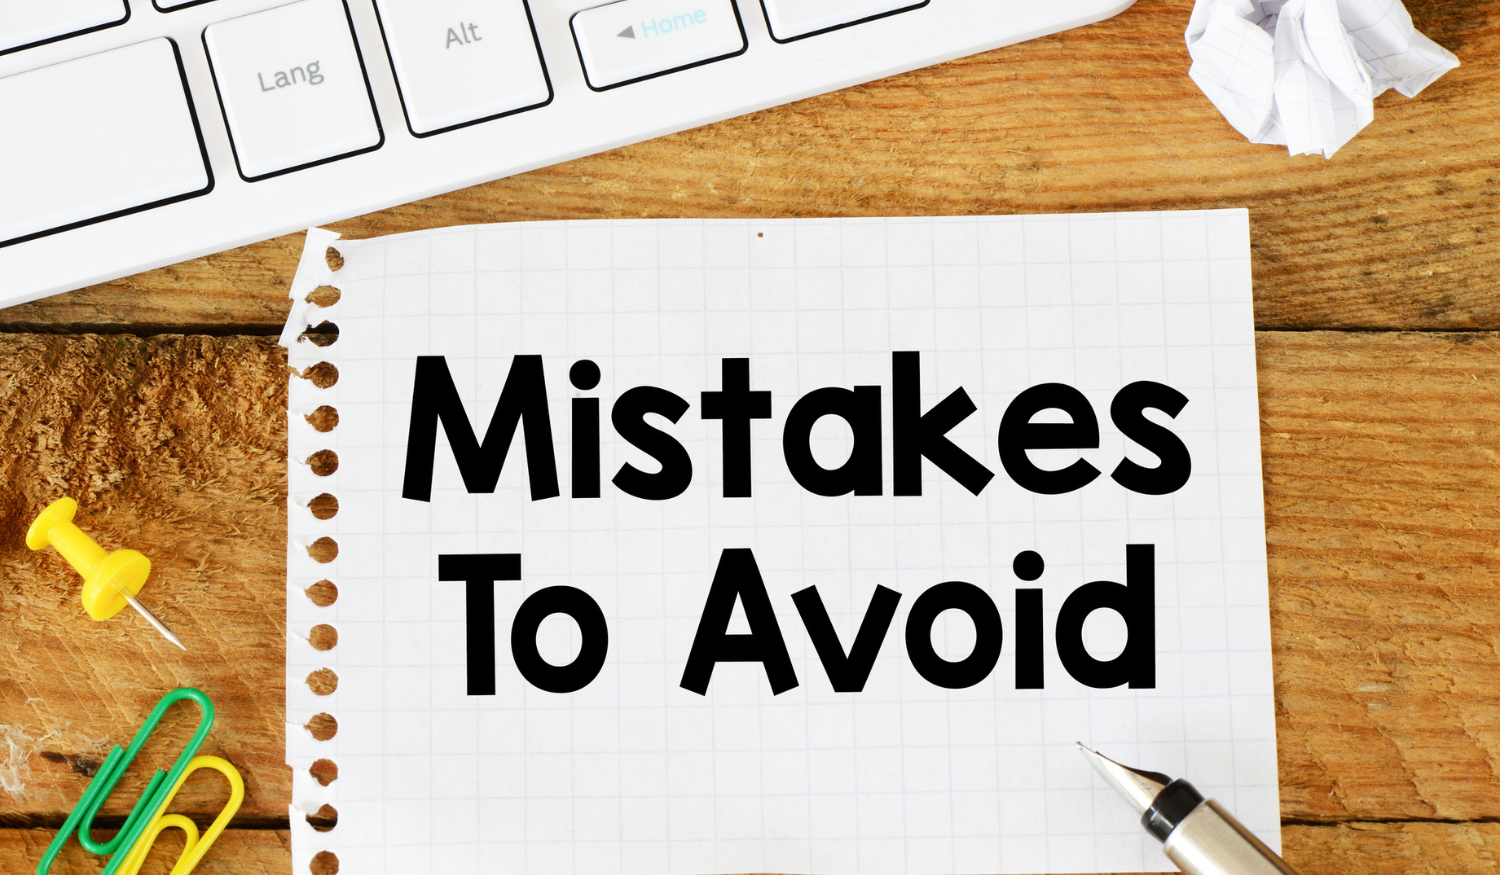 Top 5 Mistakes Nonprofits Make (And How to Avoid Them)